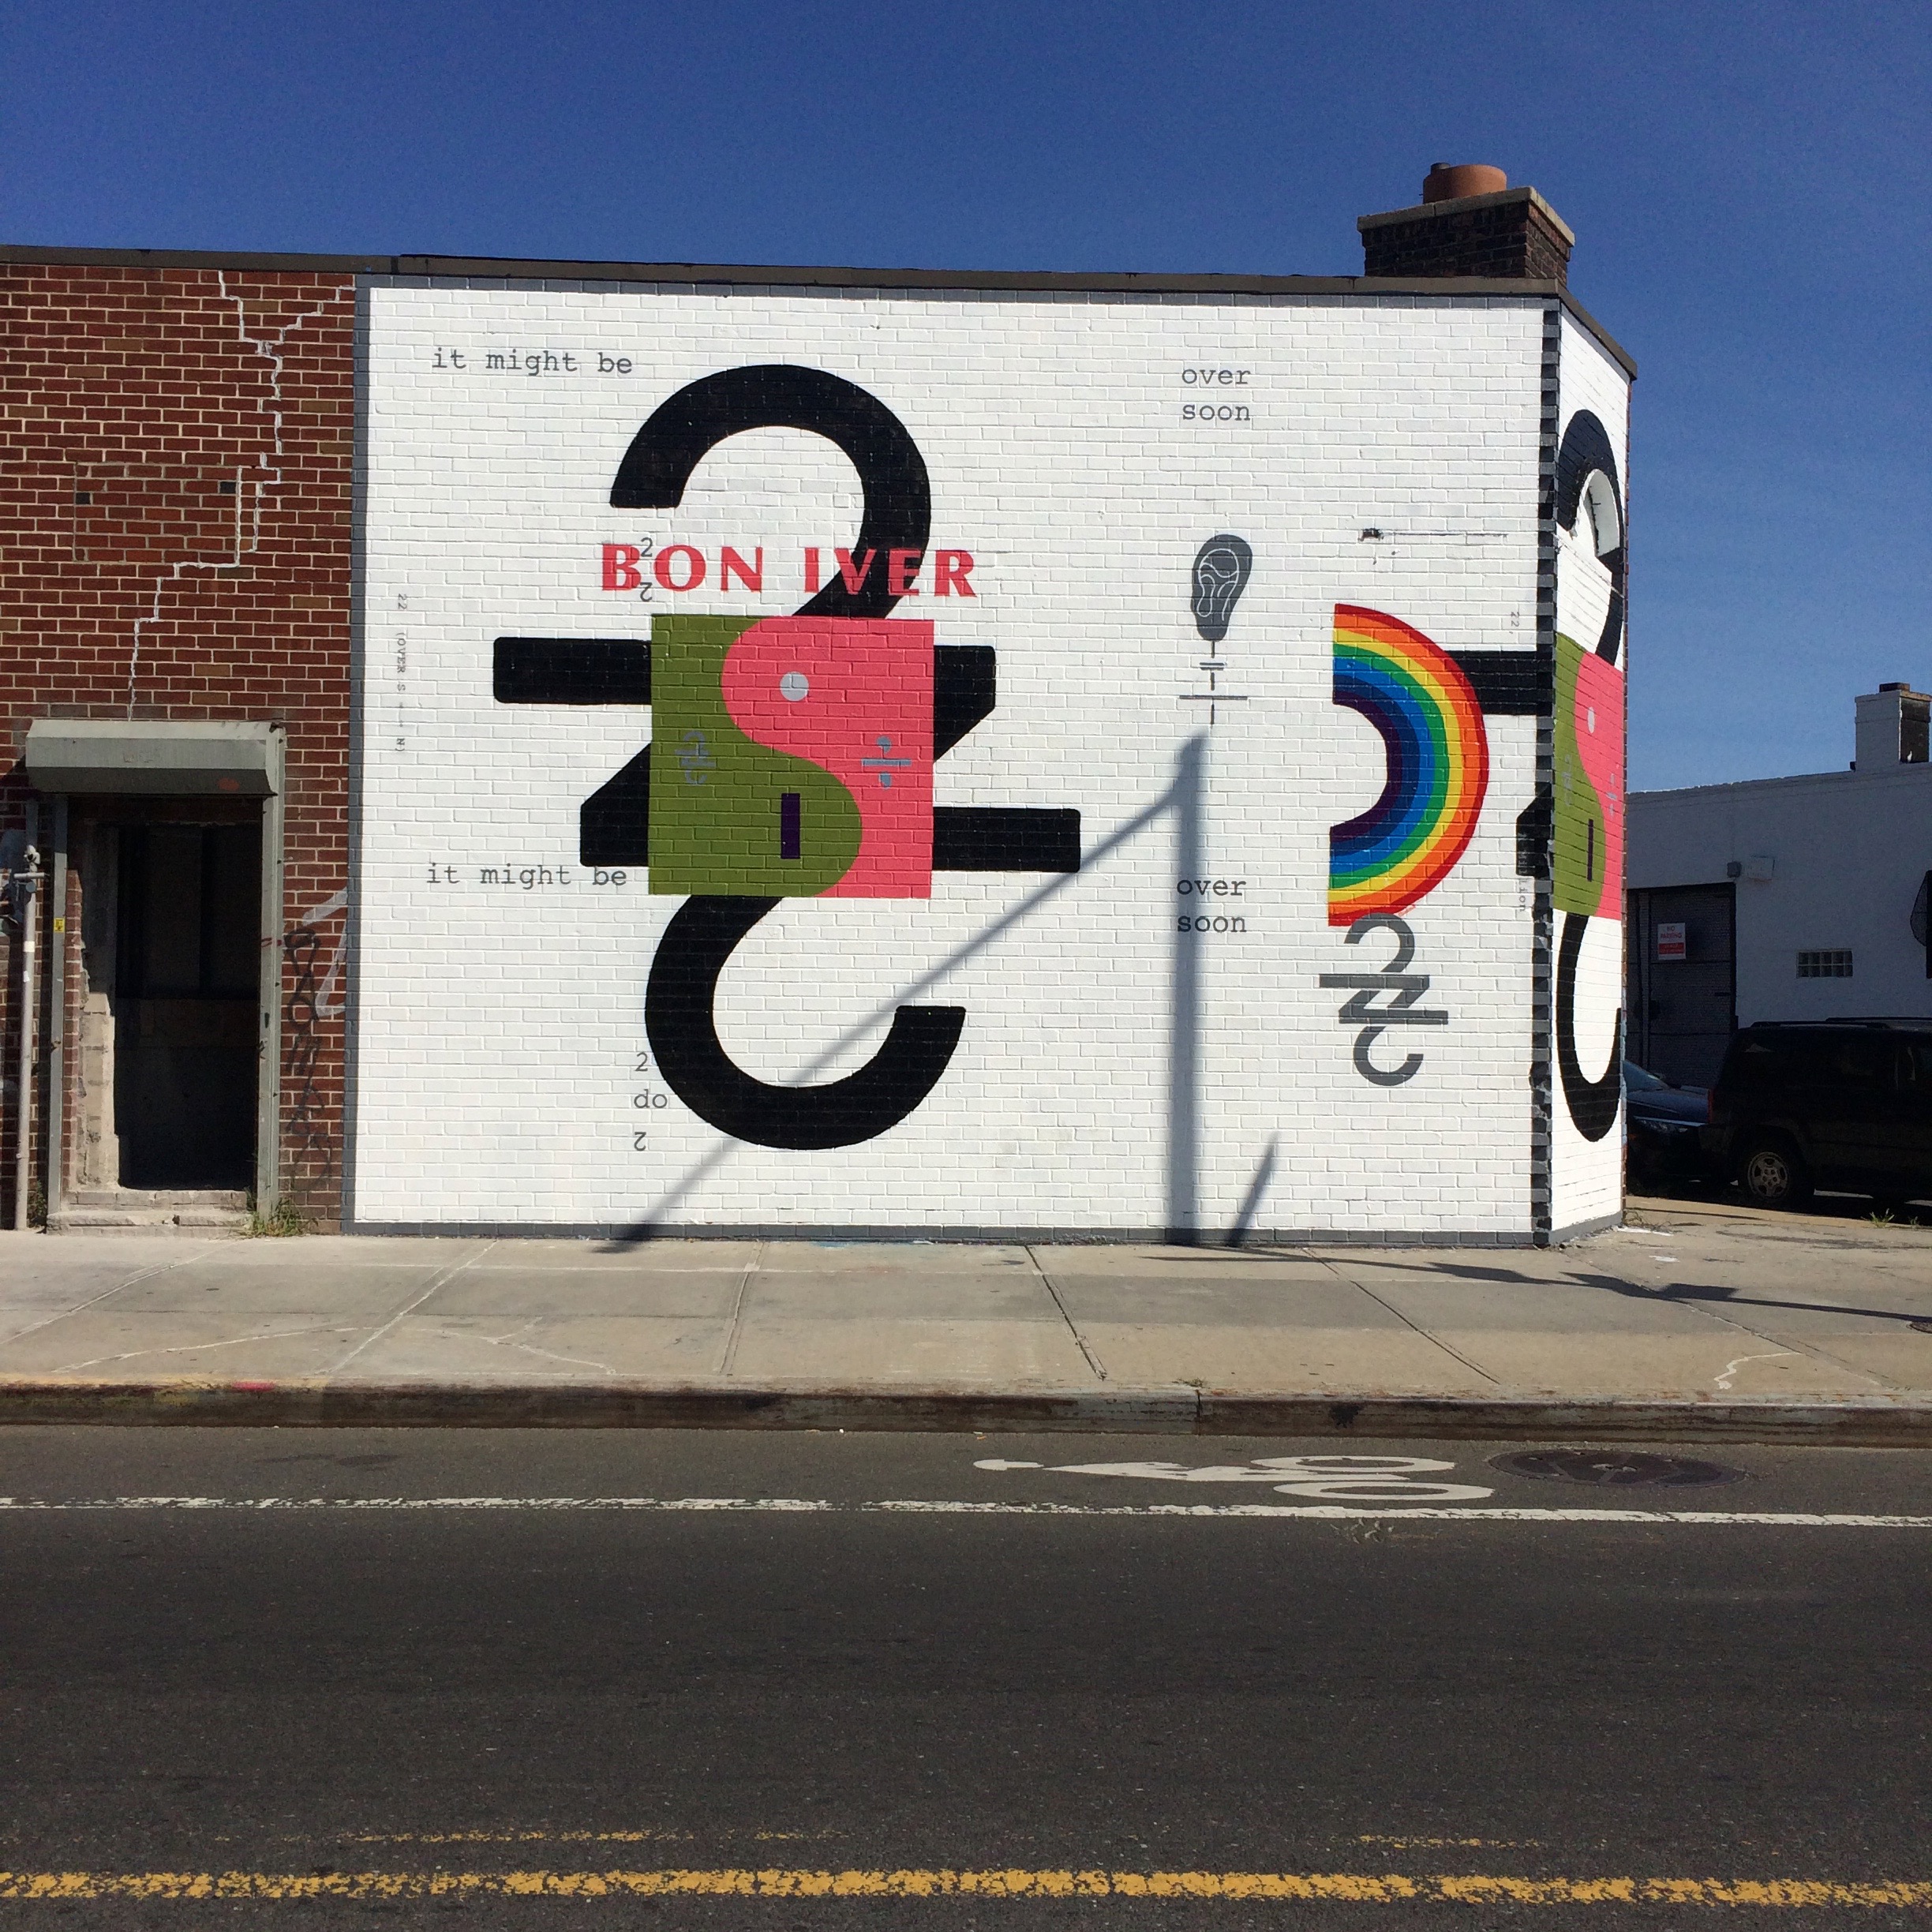  Brooklyn murals that build anticipation for the new album to fever pitch 